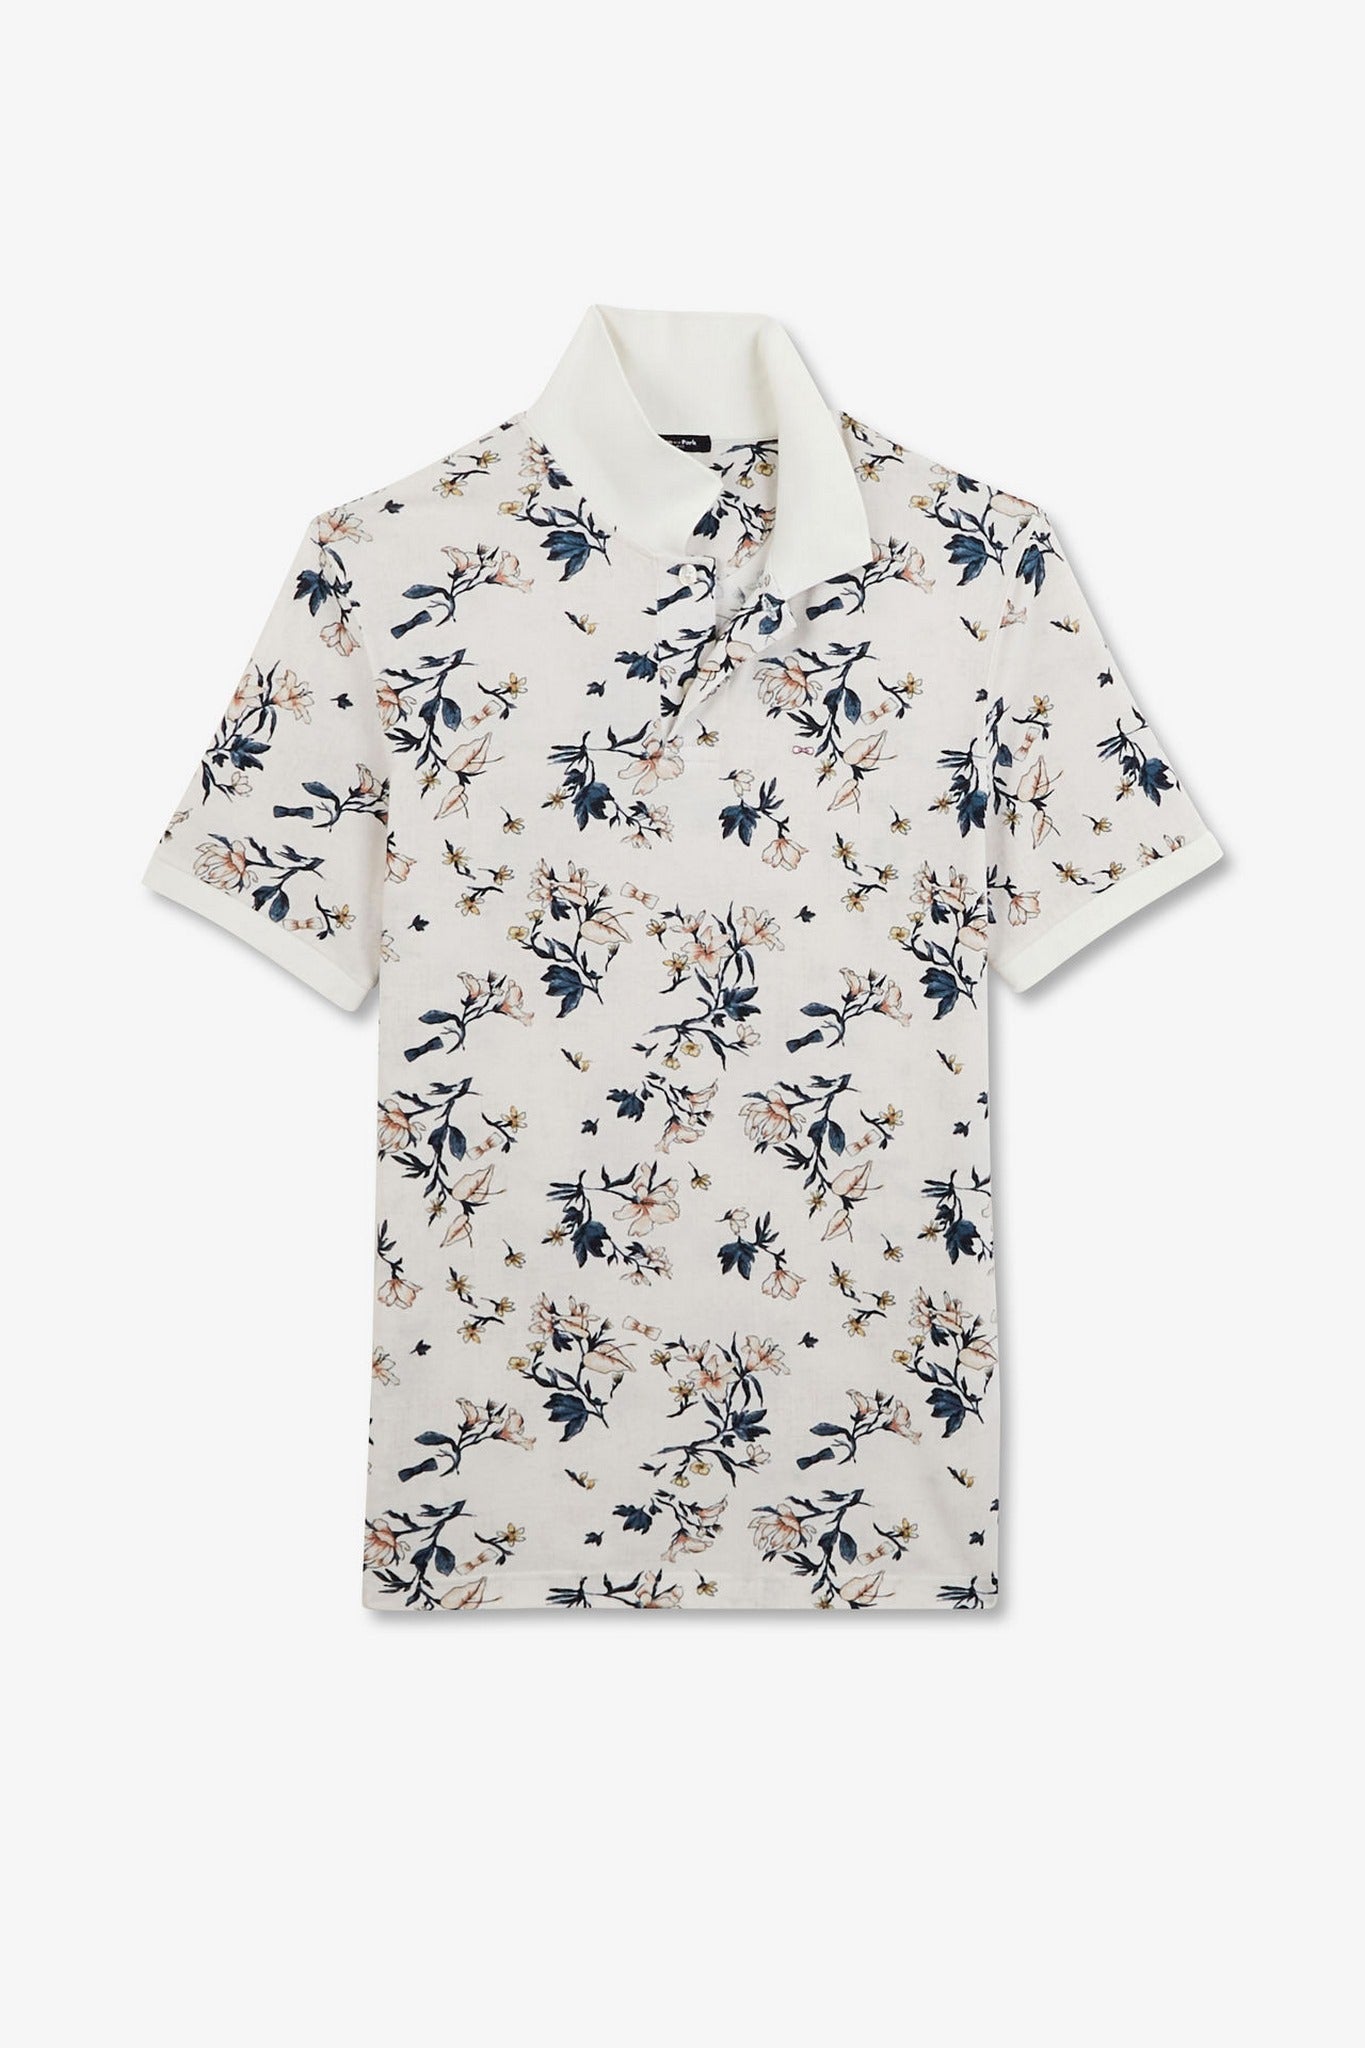 White polo shirt with an exclusive floral print - Image 2